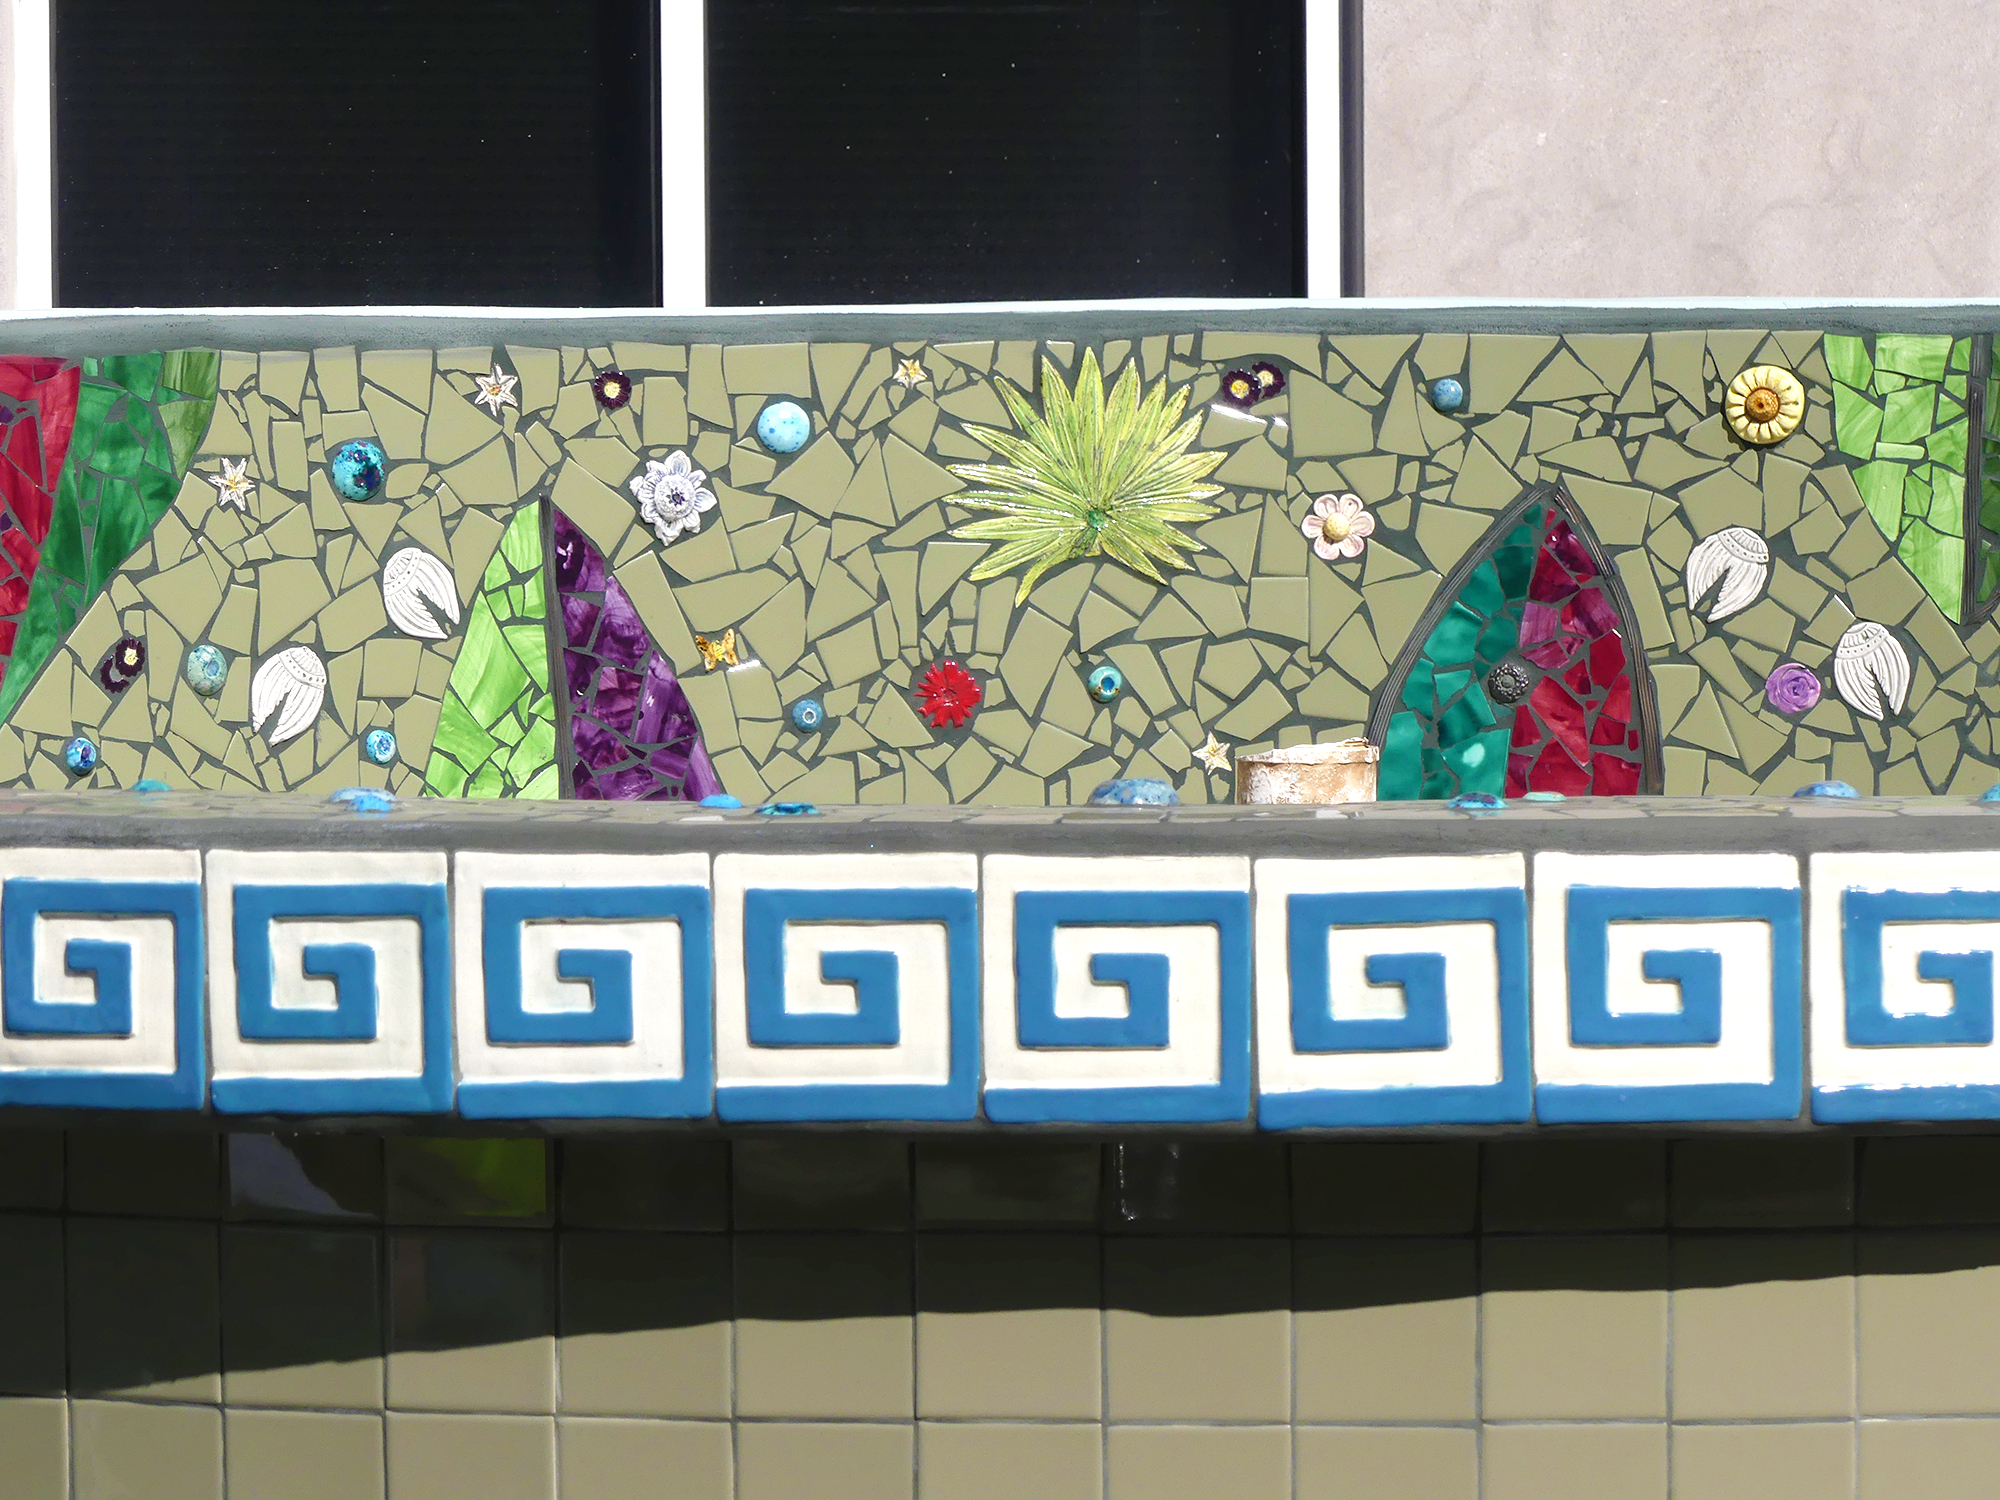 Detail of the installation near the entrance to the Duval County Tax Collector’ Office.